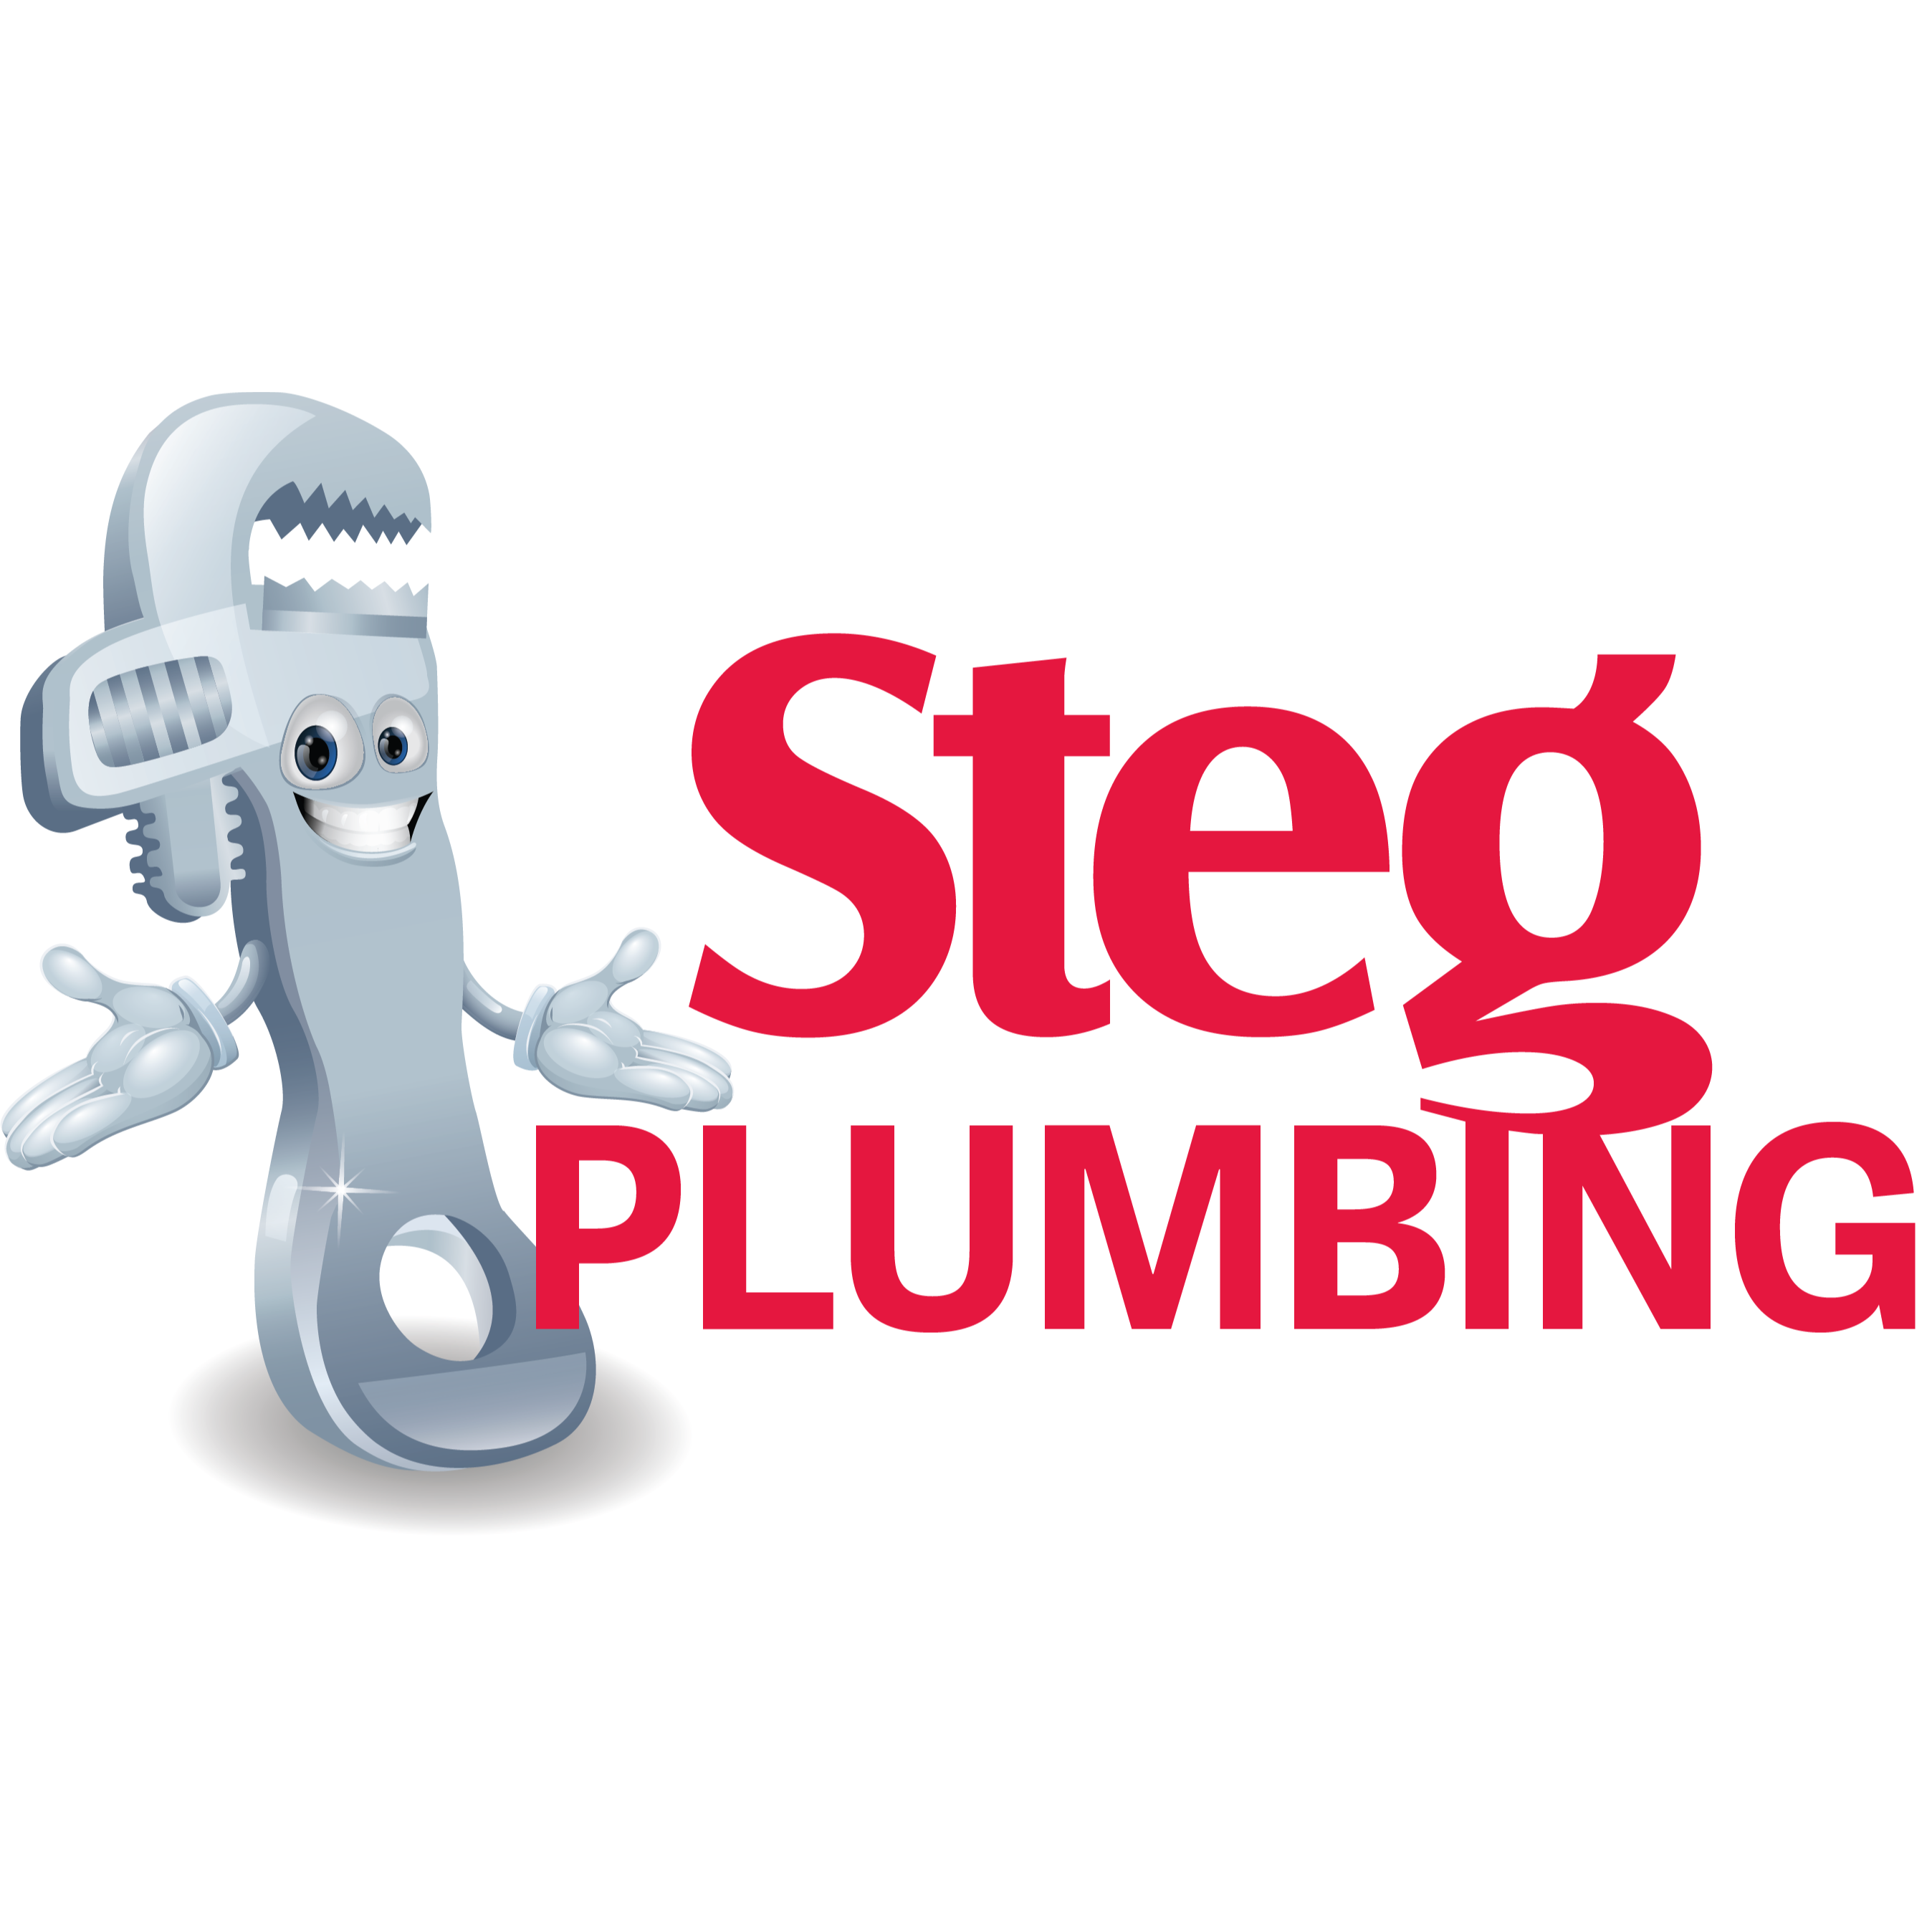 Steg Plumbing - Indianapolis, IN 46234 - (317)286-6747 | ShowMeLocal.com